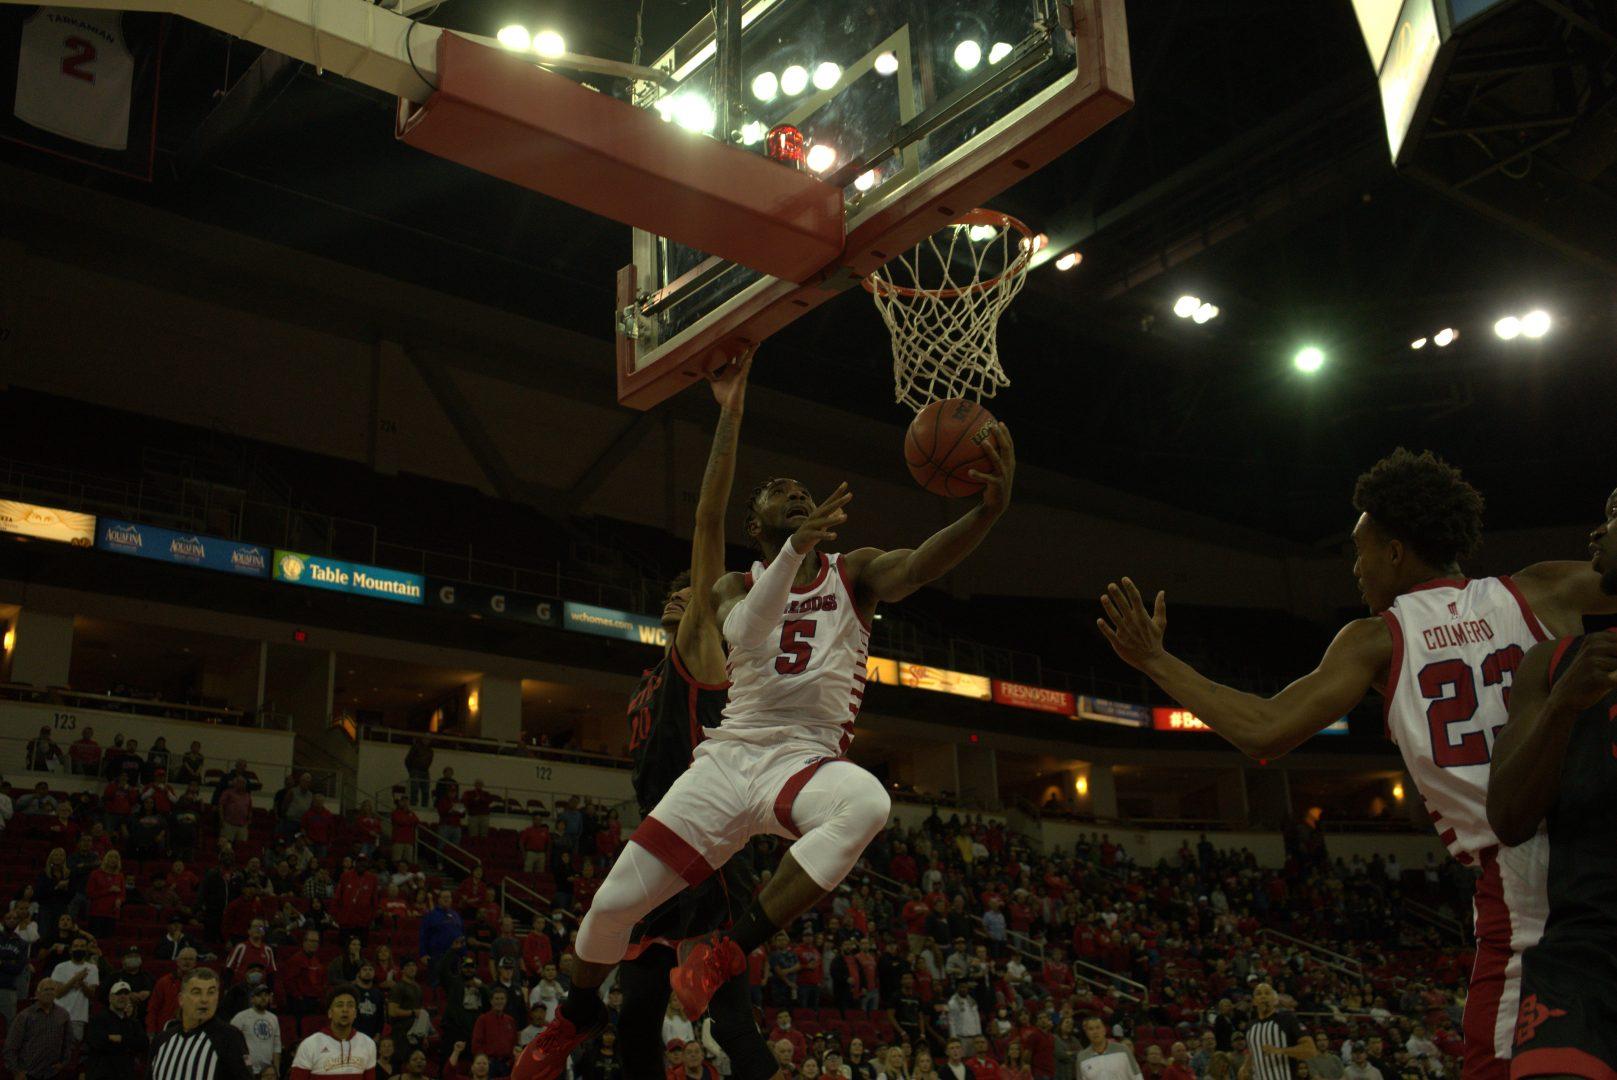 Fresno State guard Jordan Campbell performing a layup in the second half vs. SDSU on Feb. 19, 2022. (Wyatt Bible/ The Collegian)